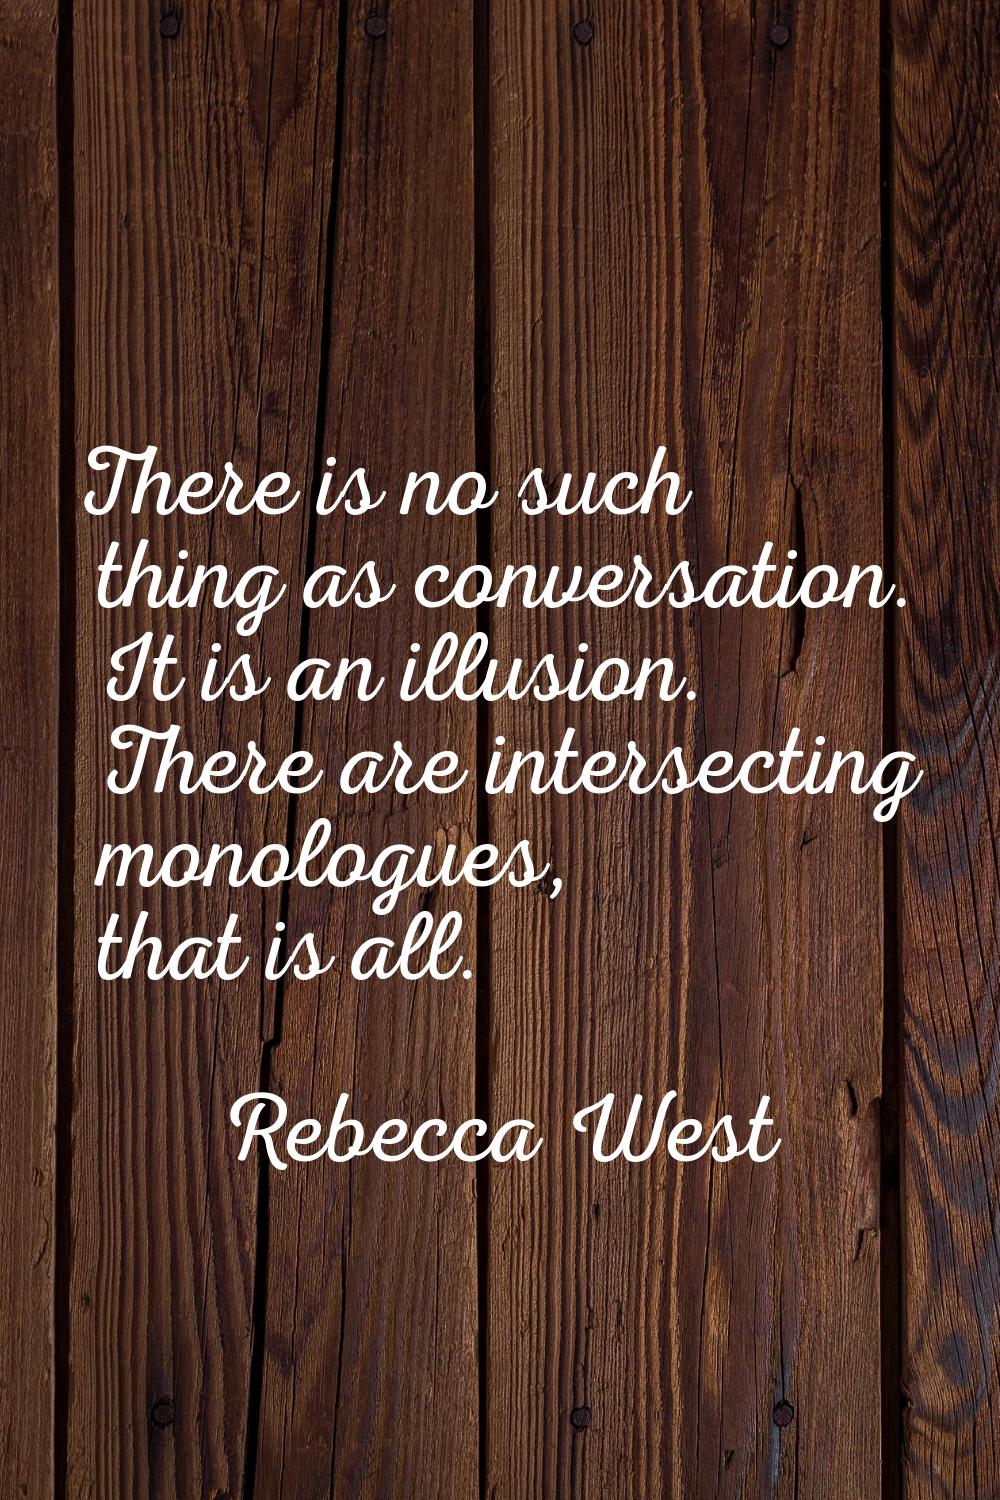 There is no such thing as conversation. It is an illusion. There are intersecting monologues, that 